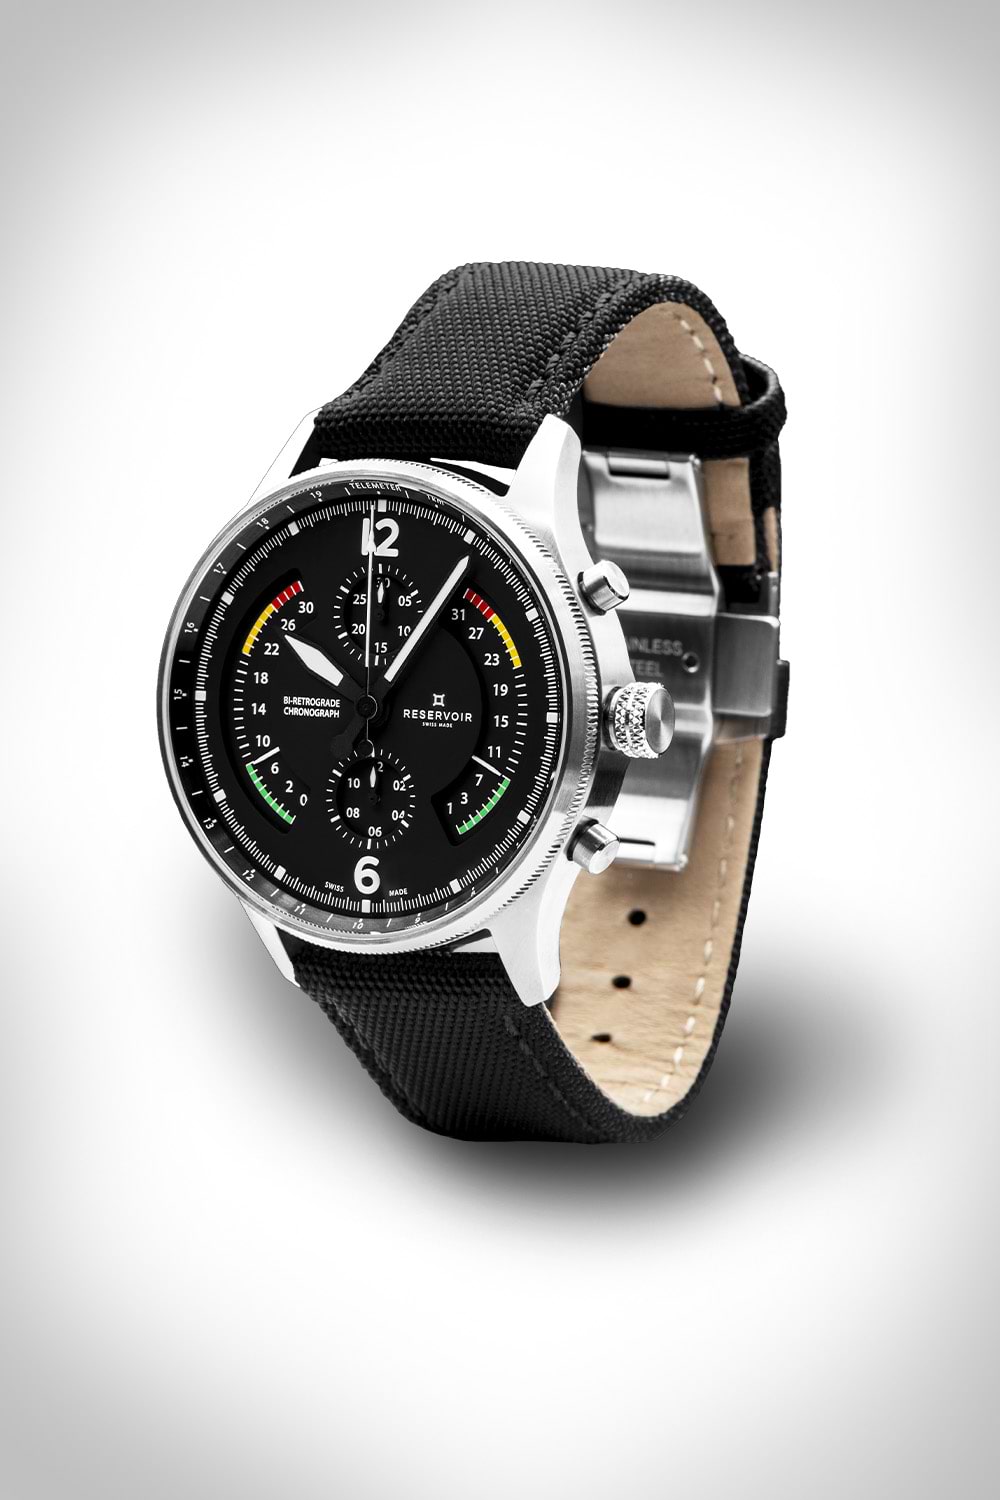 Wristwatch with black dial, stainless steel case, sub-dials, colorful accents, and black strap.